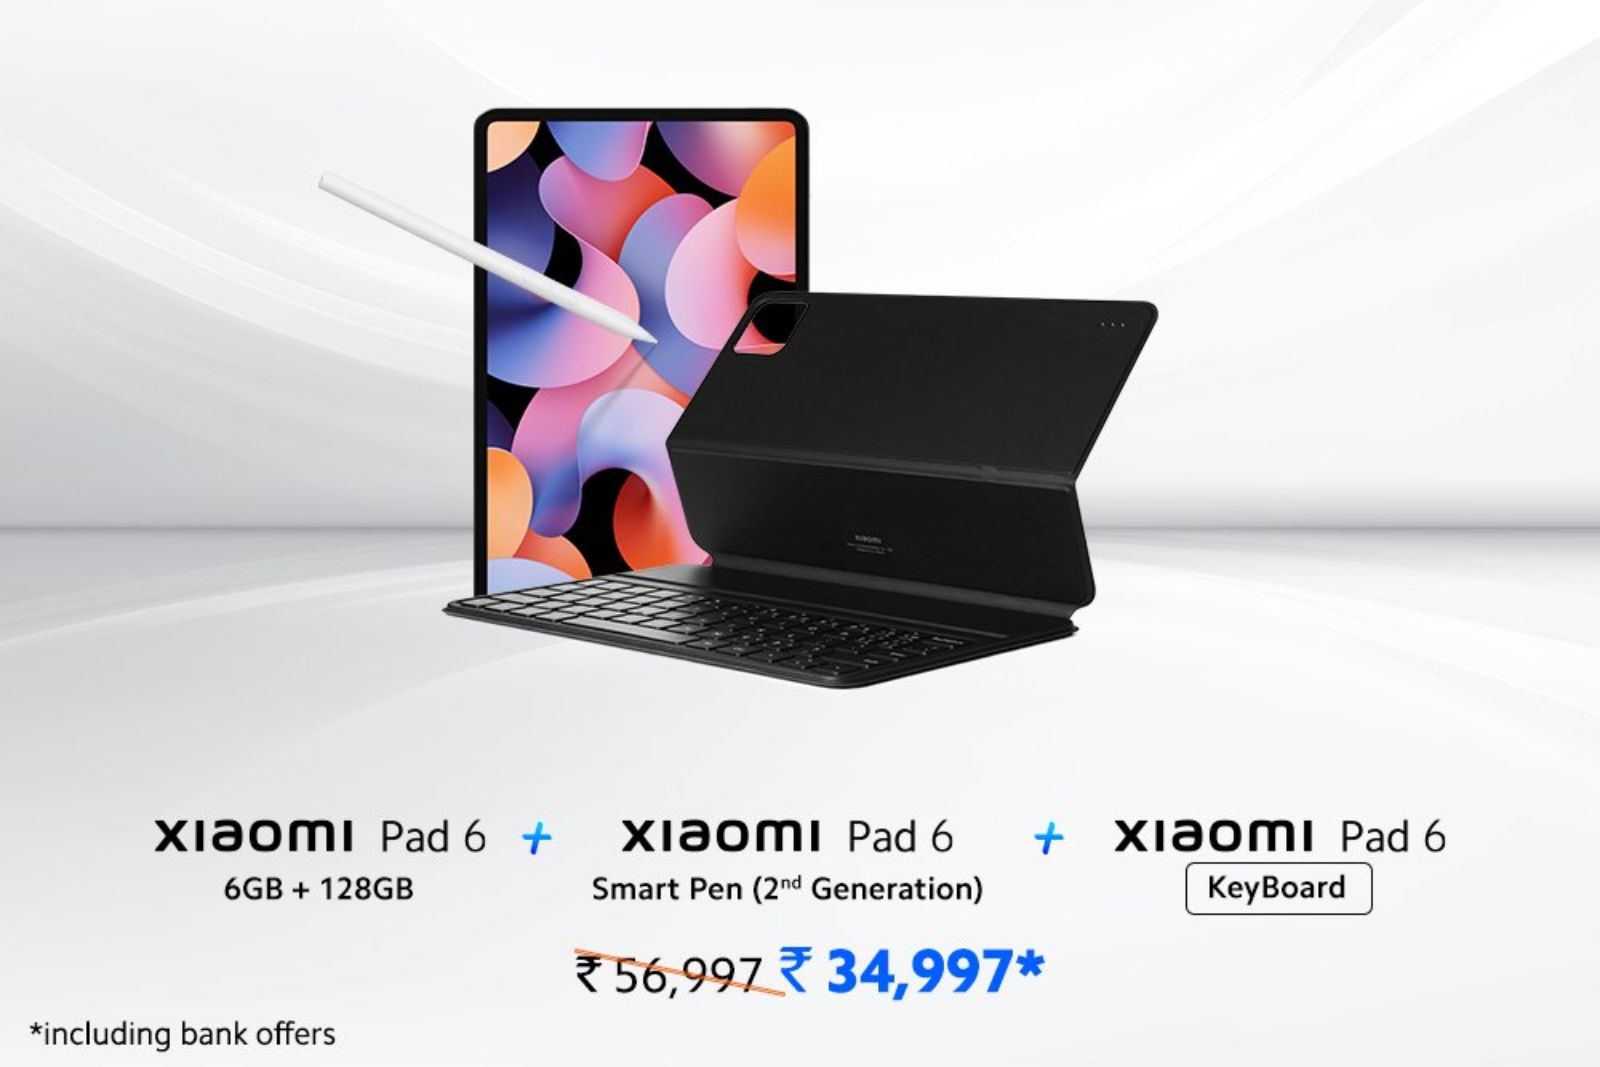 . Xiaomi brings great combo offers for those who are buying the Pad 6, 2nd Gen Smart Pen stylus, and Xiaomi keyboard combo. The combo is available at just Rs 34,997 through Xiaomi India's official website.